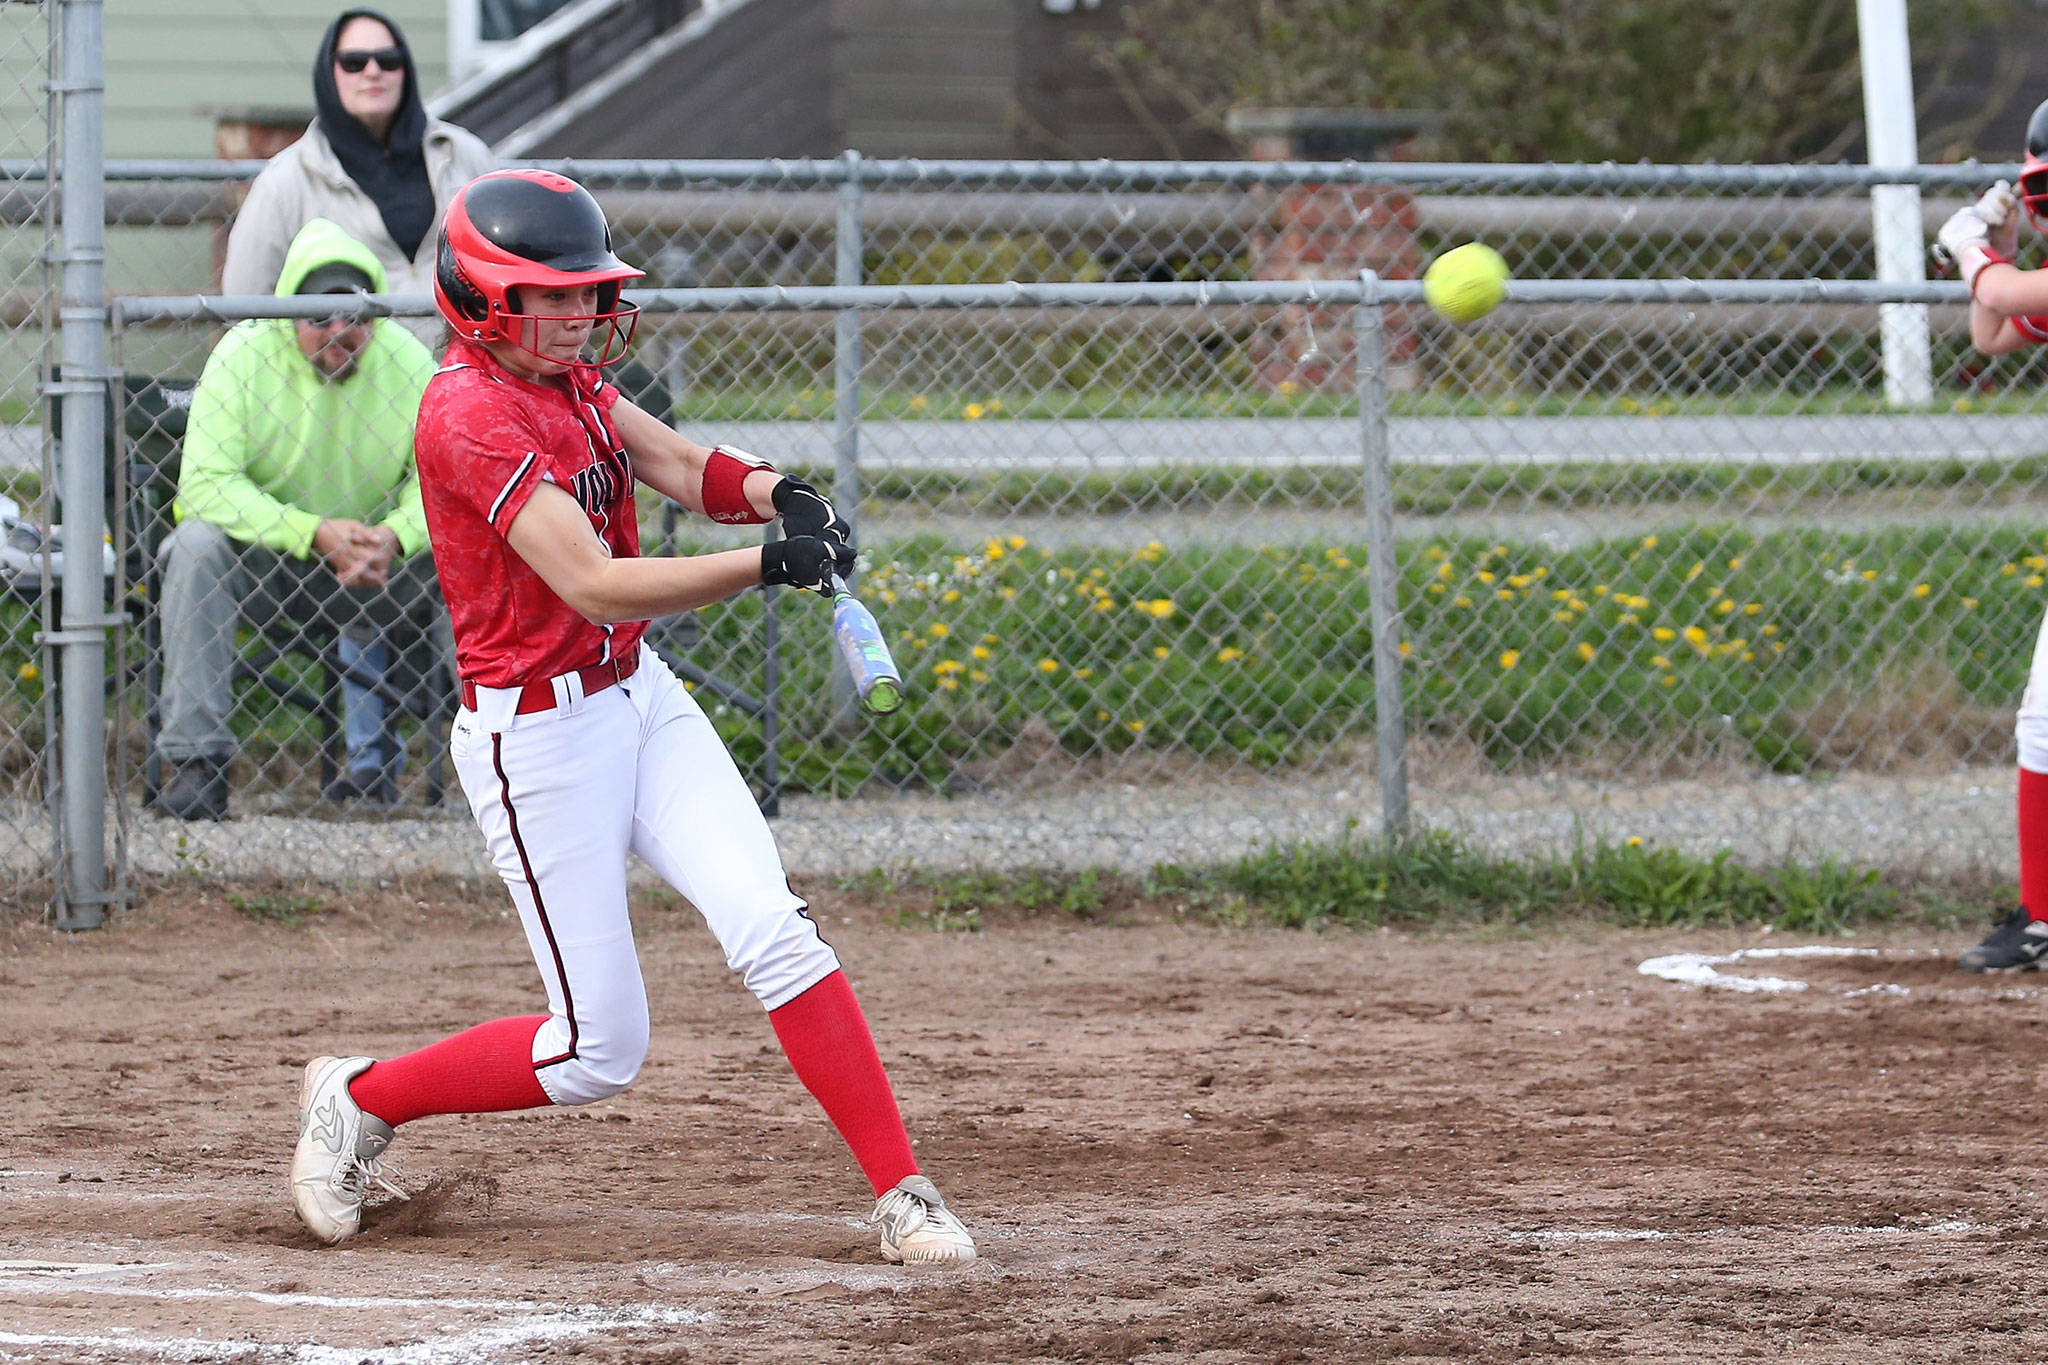 Scout Smith rips a hit for the Wolves last spring. (Photo by John Fisken)